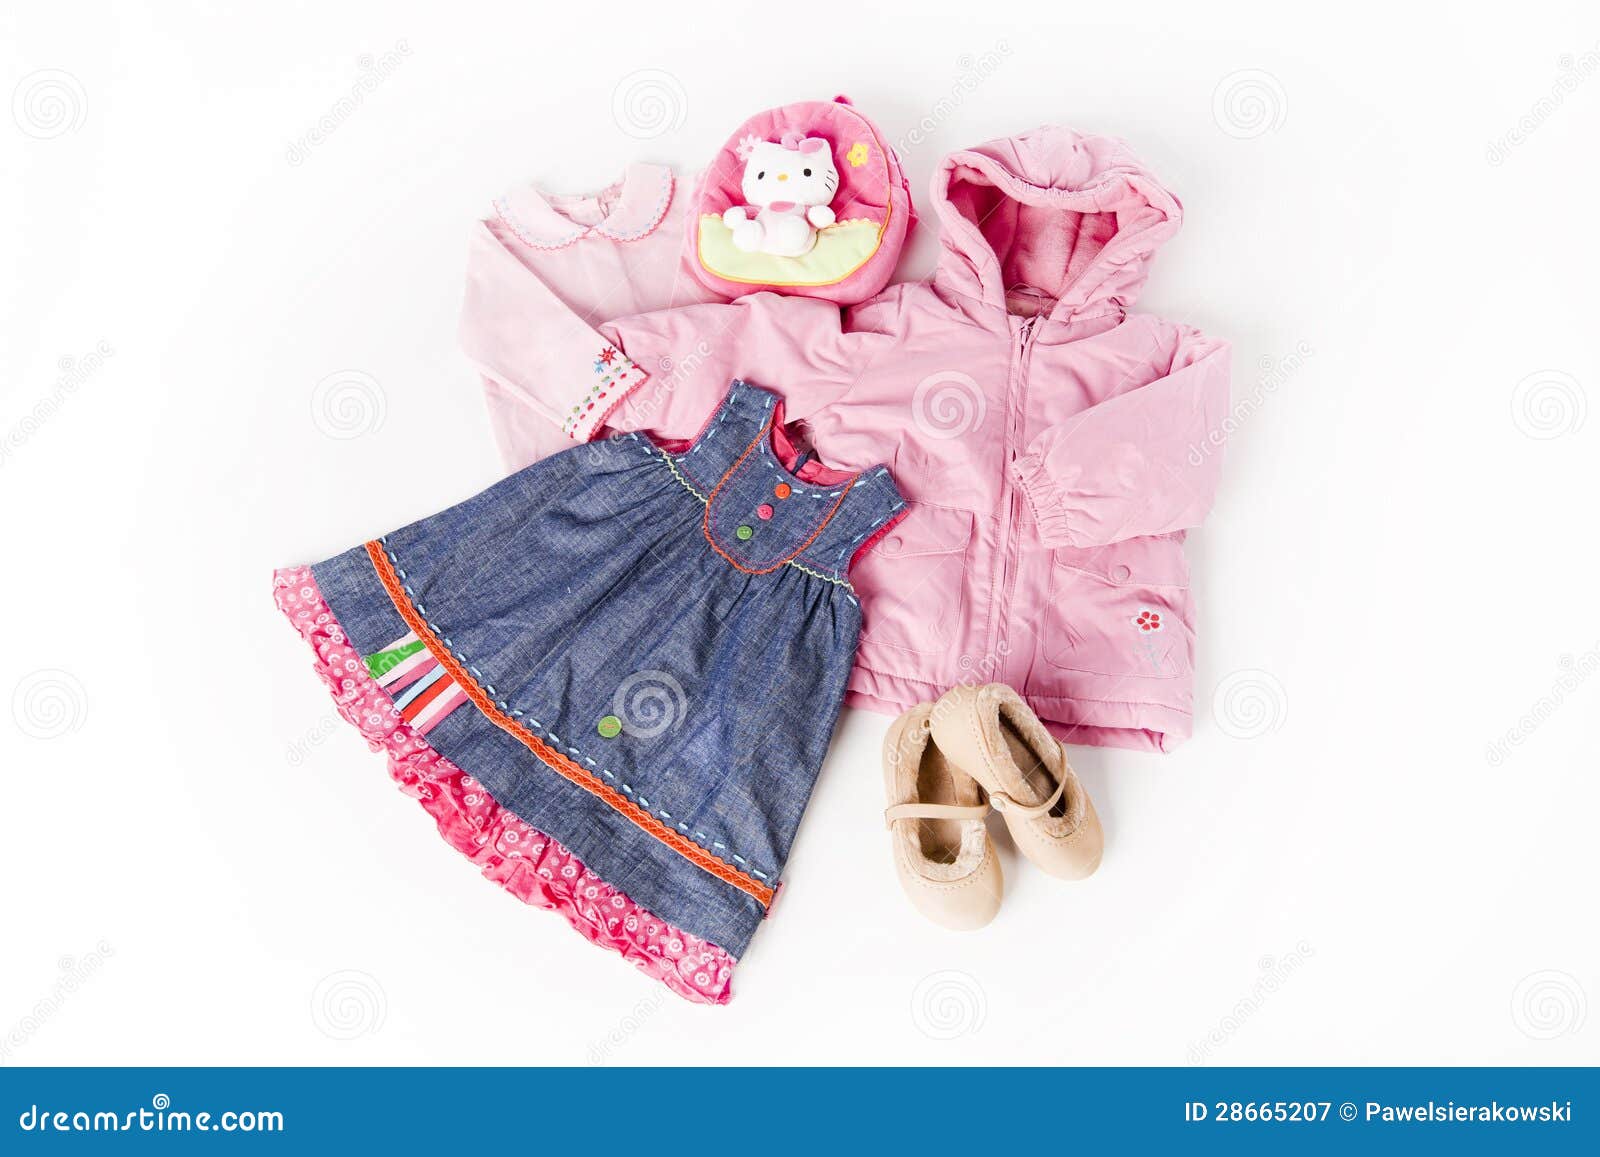 Clothes for Little Cute Girl Stock Image - Image of fashionable, object ...